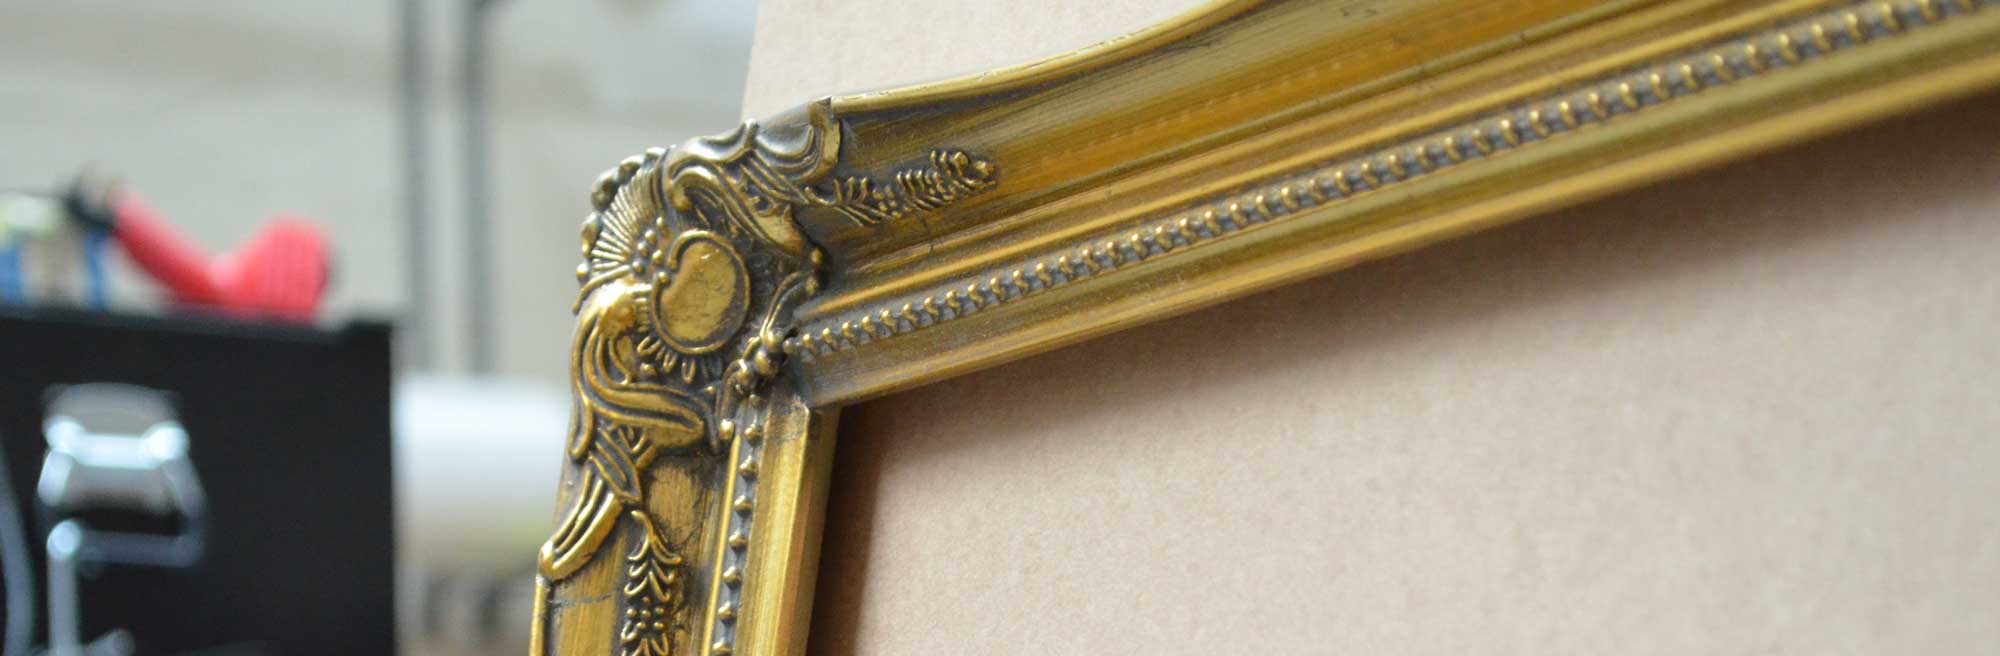 An example of a gold ornate picture frame